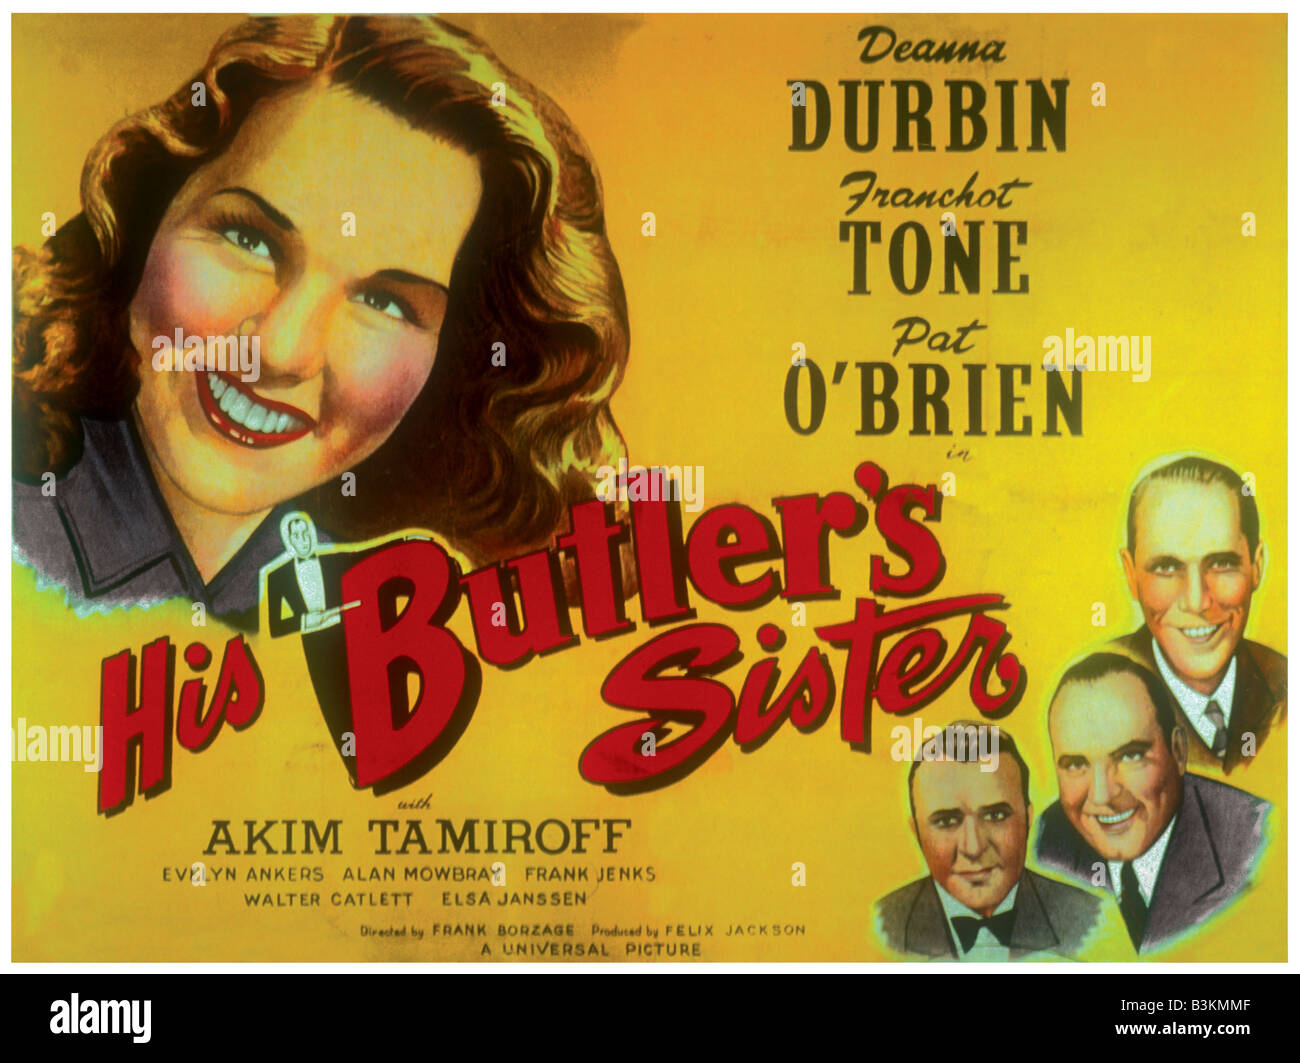 HIS BUTLER'S SISTERS  poster for 1943 Universal film with Deanna Durbin Stock Photo